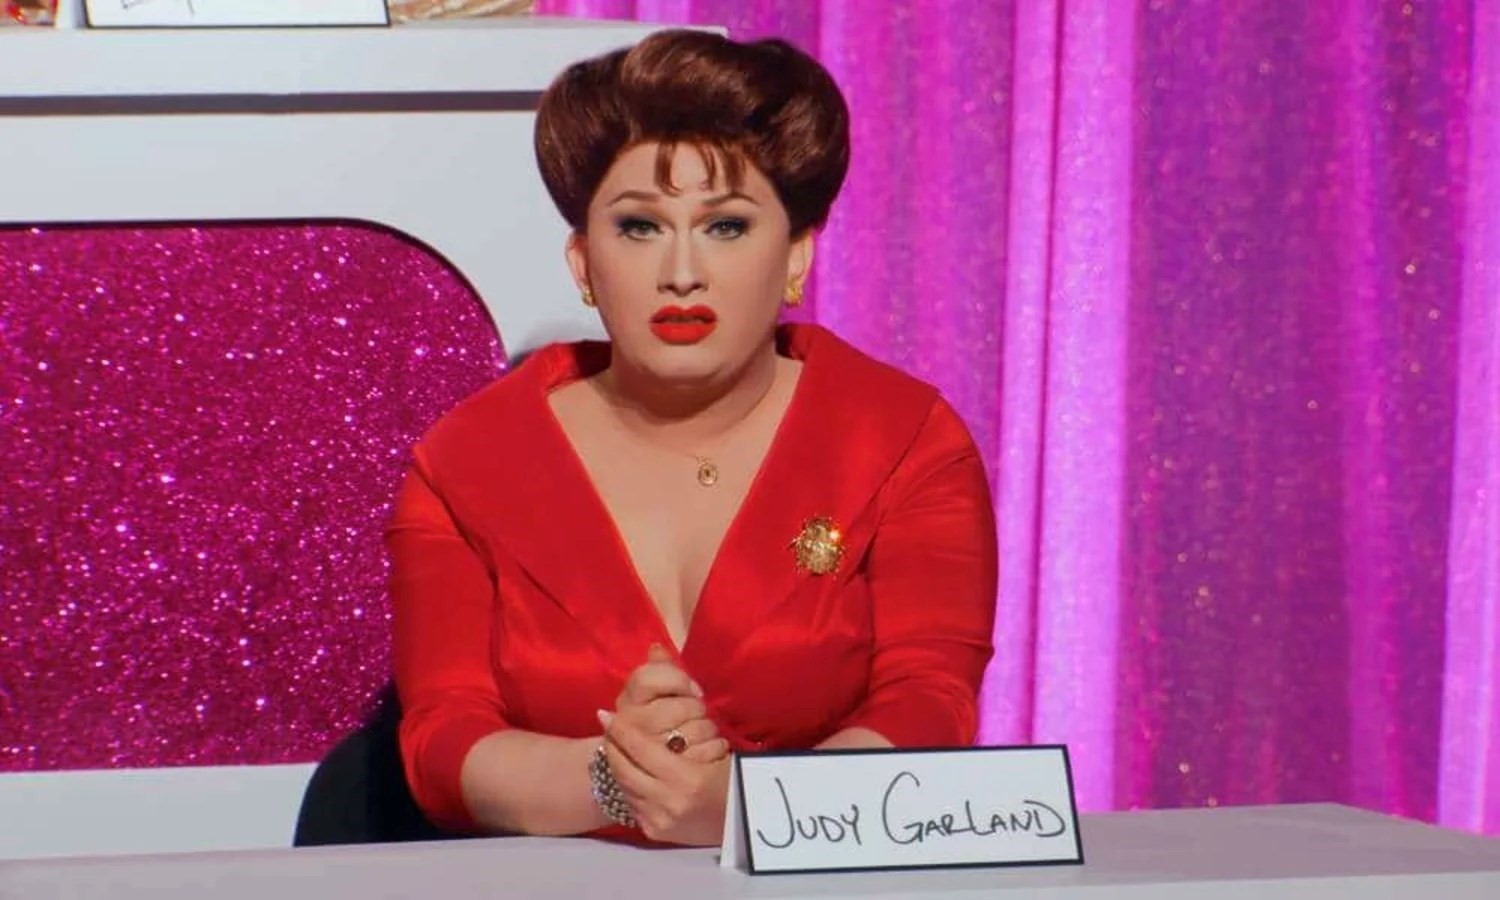 Jinkx Monsoon as Judy Garland in the All Stars 7 Snatch Game